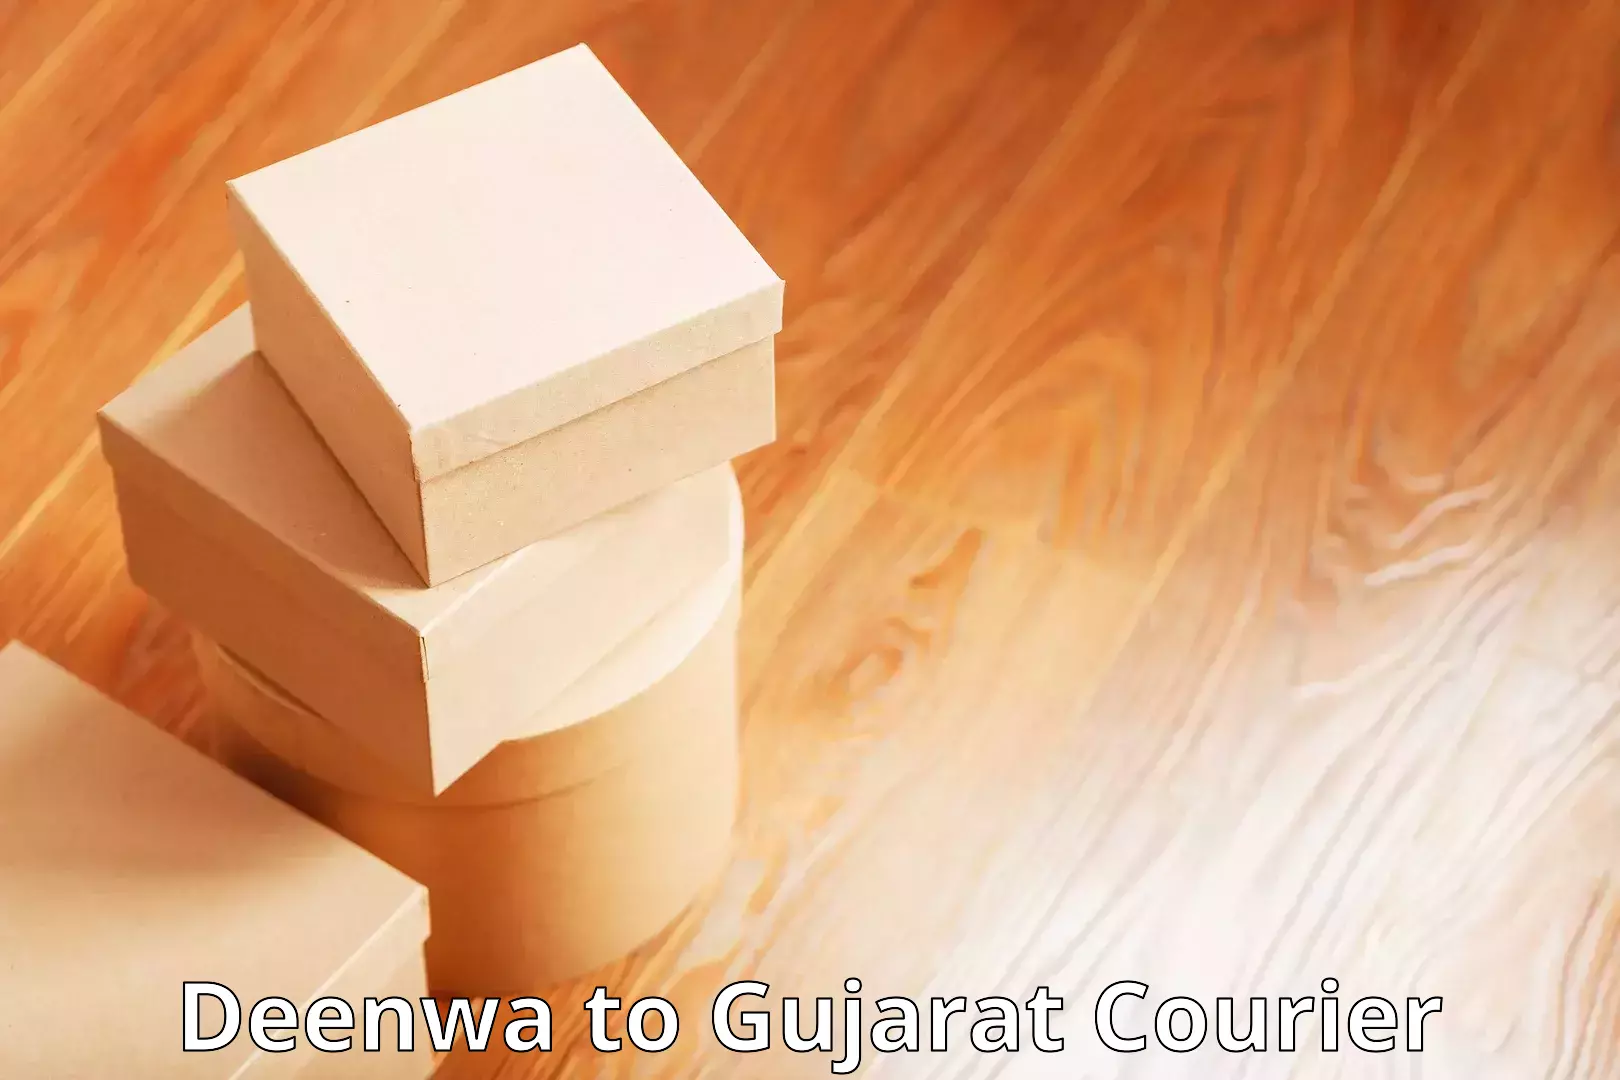 Global courier networks Deenwa to Gujarat